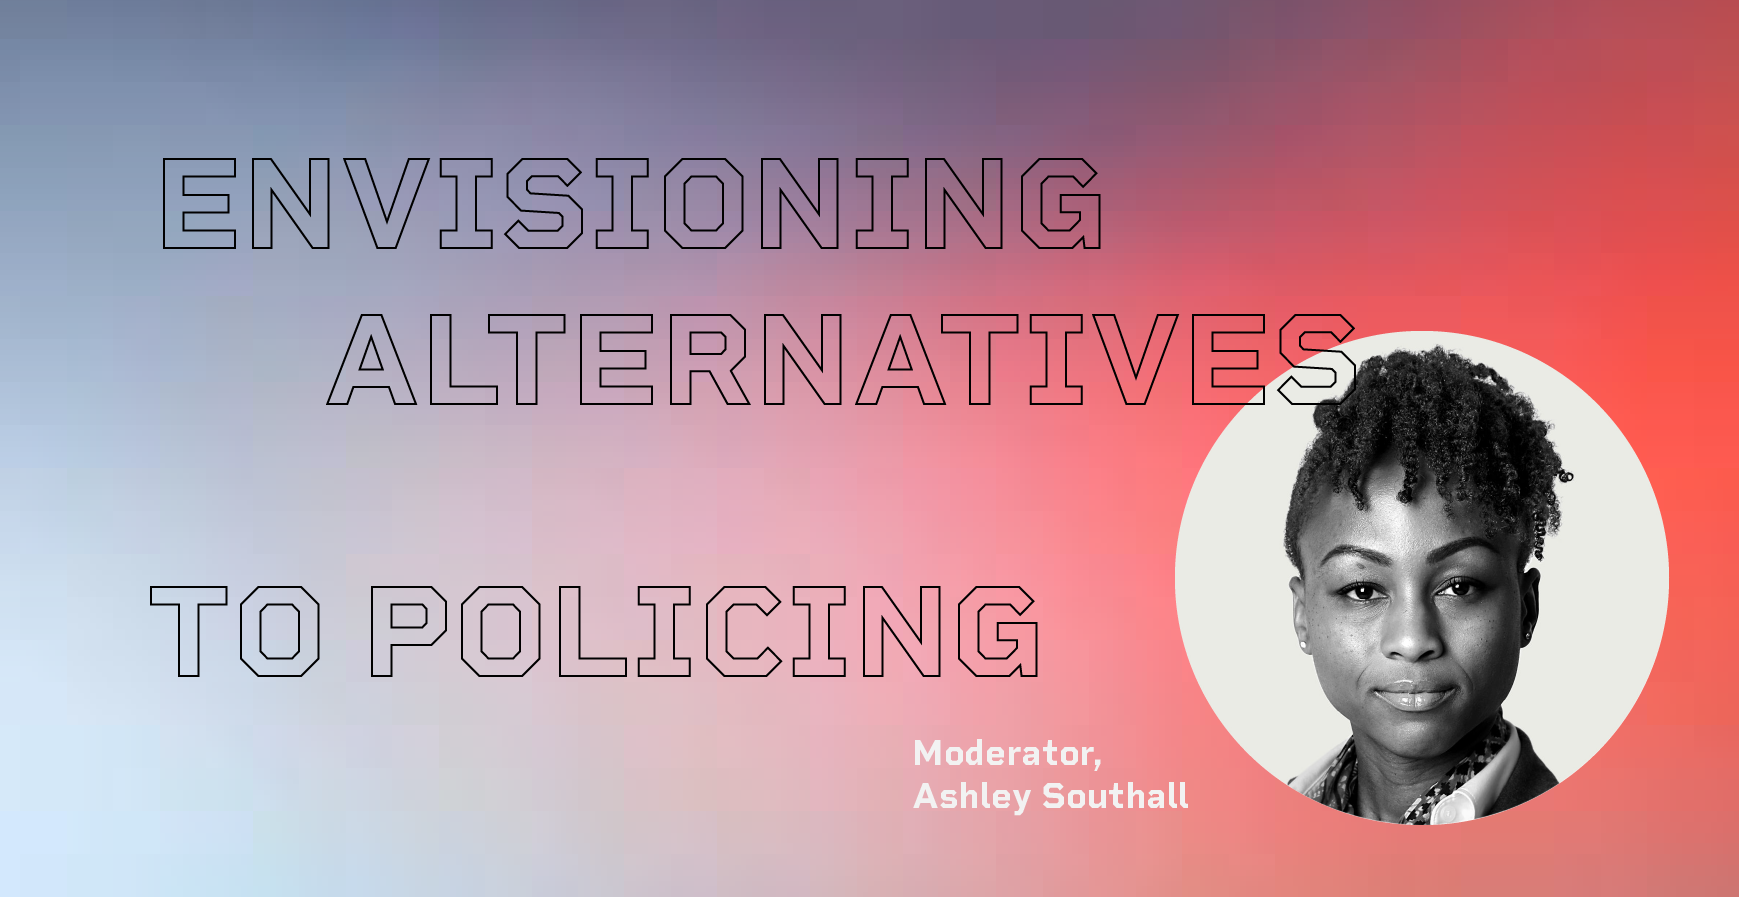 Envisioning Alternatives to Policing title treatment, Ashley Southall head shot